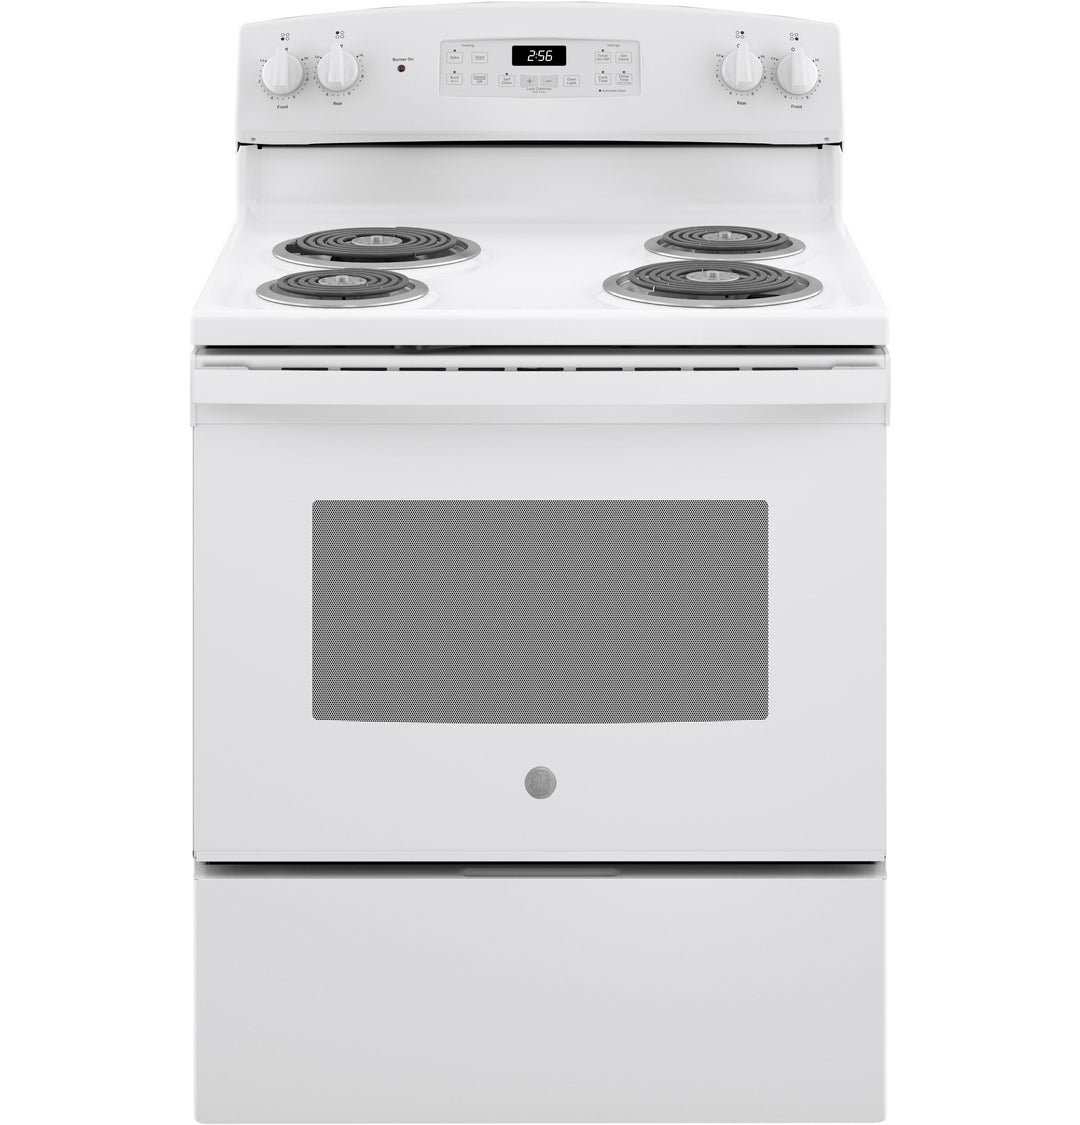 GE® 30" Free-Standing Self-Clean Electric Range Auction